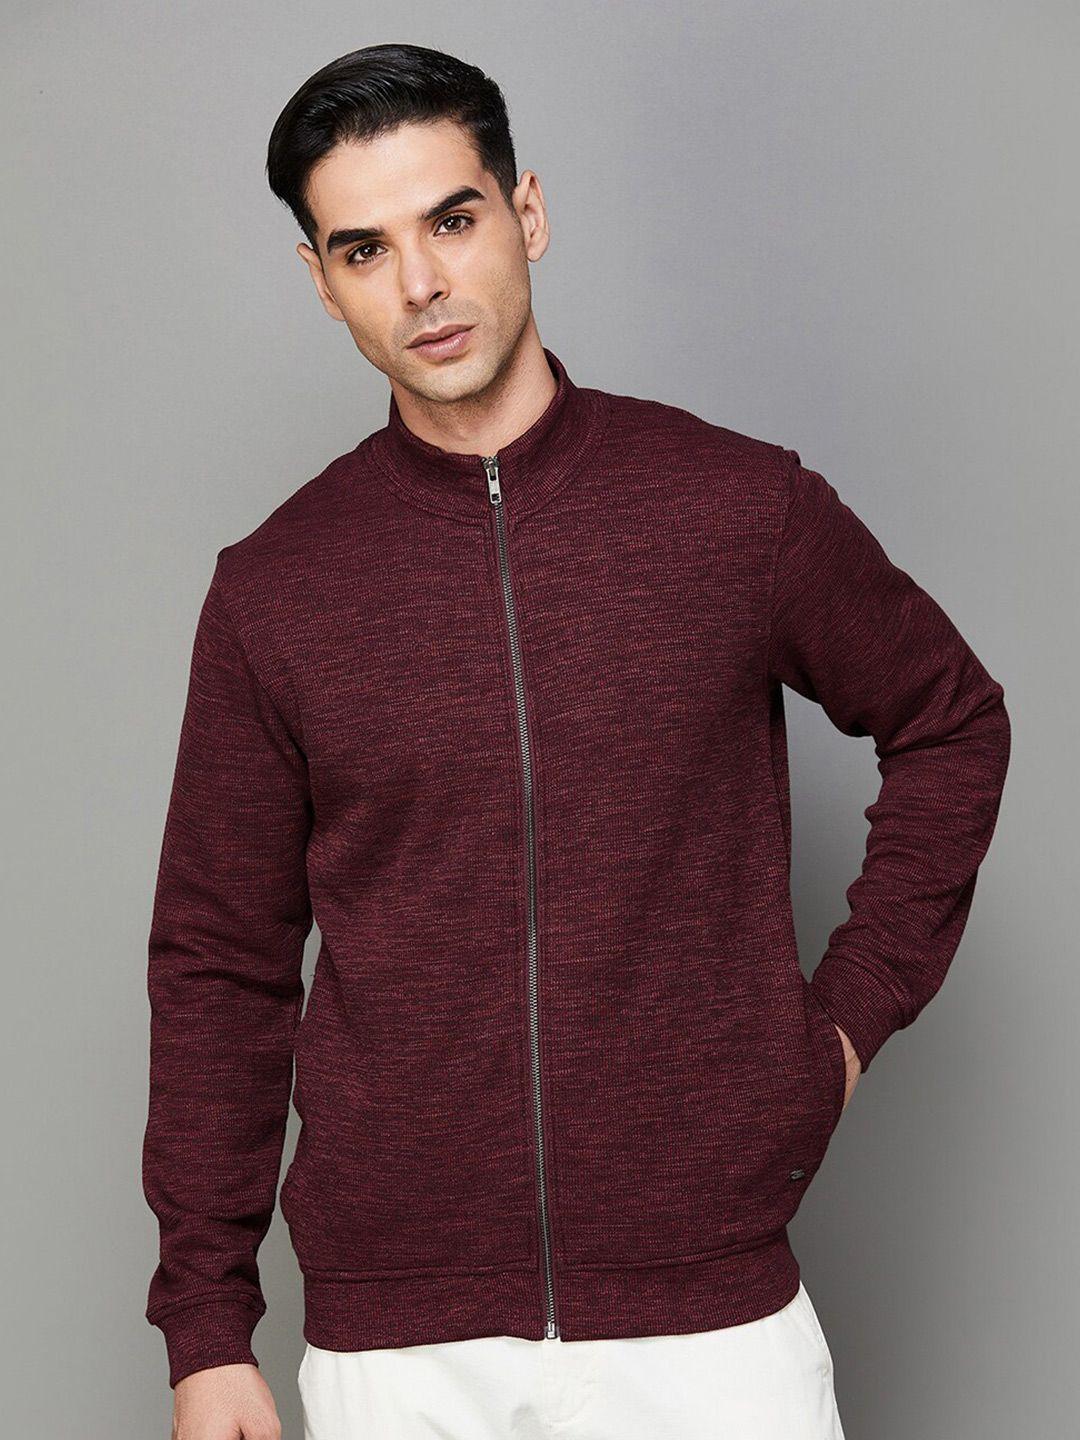 code by lifestyle long sleeves front-open sweatshirt